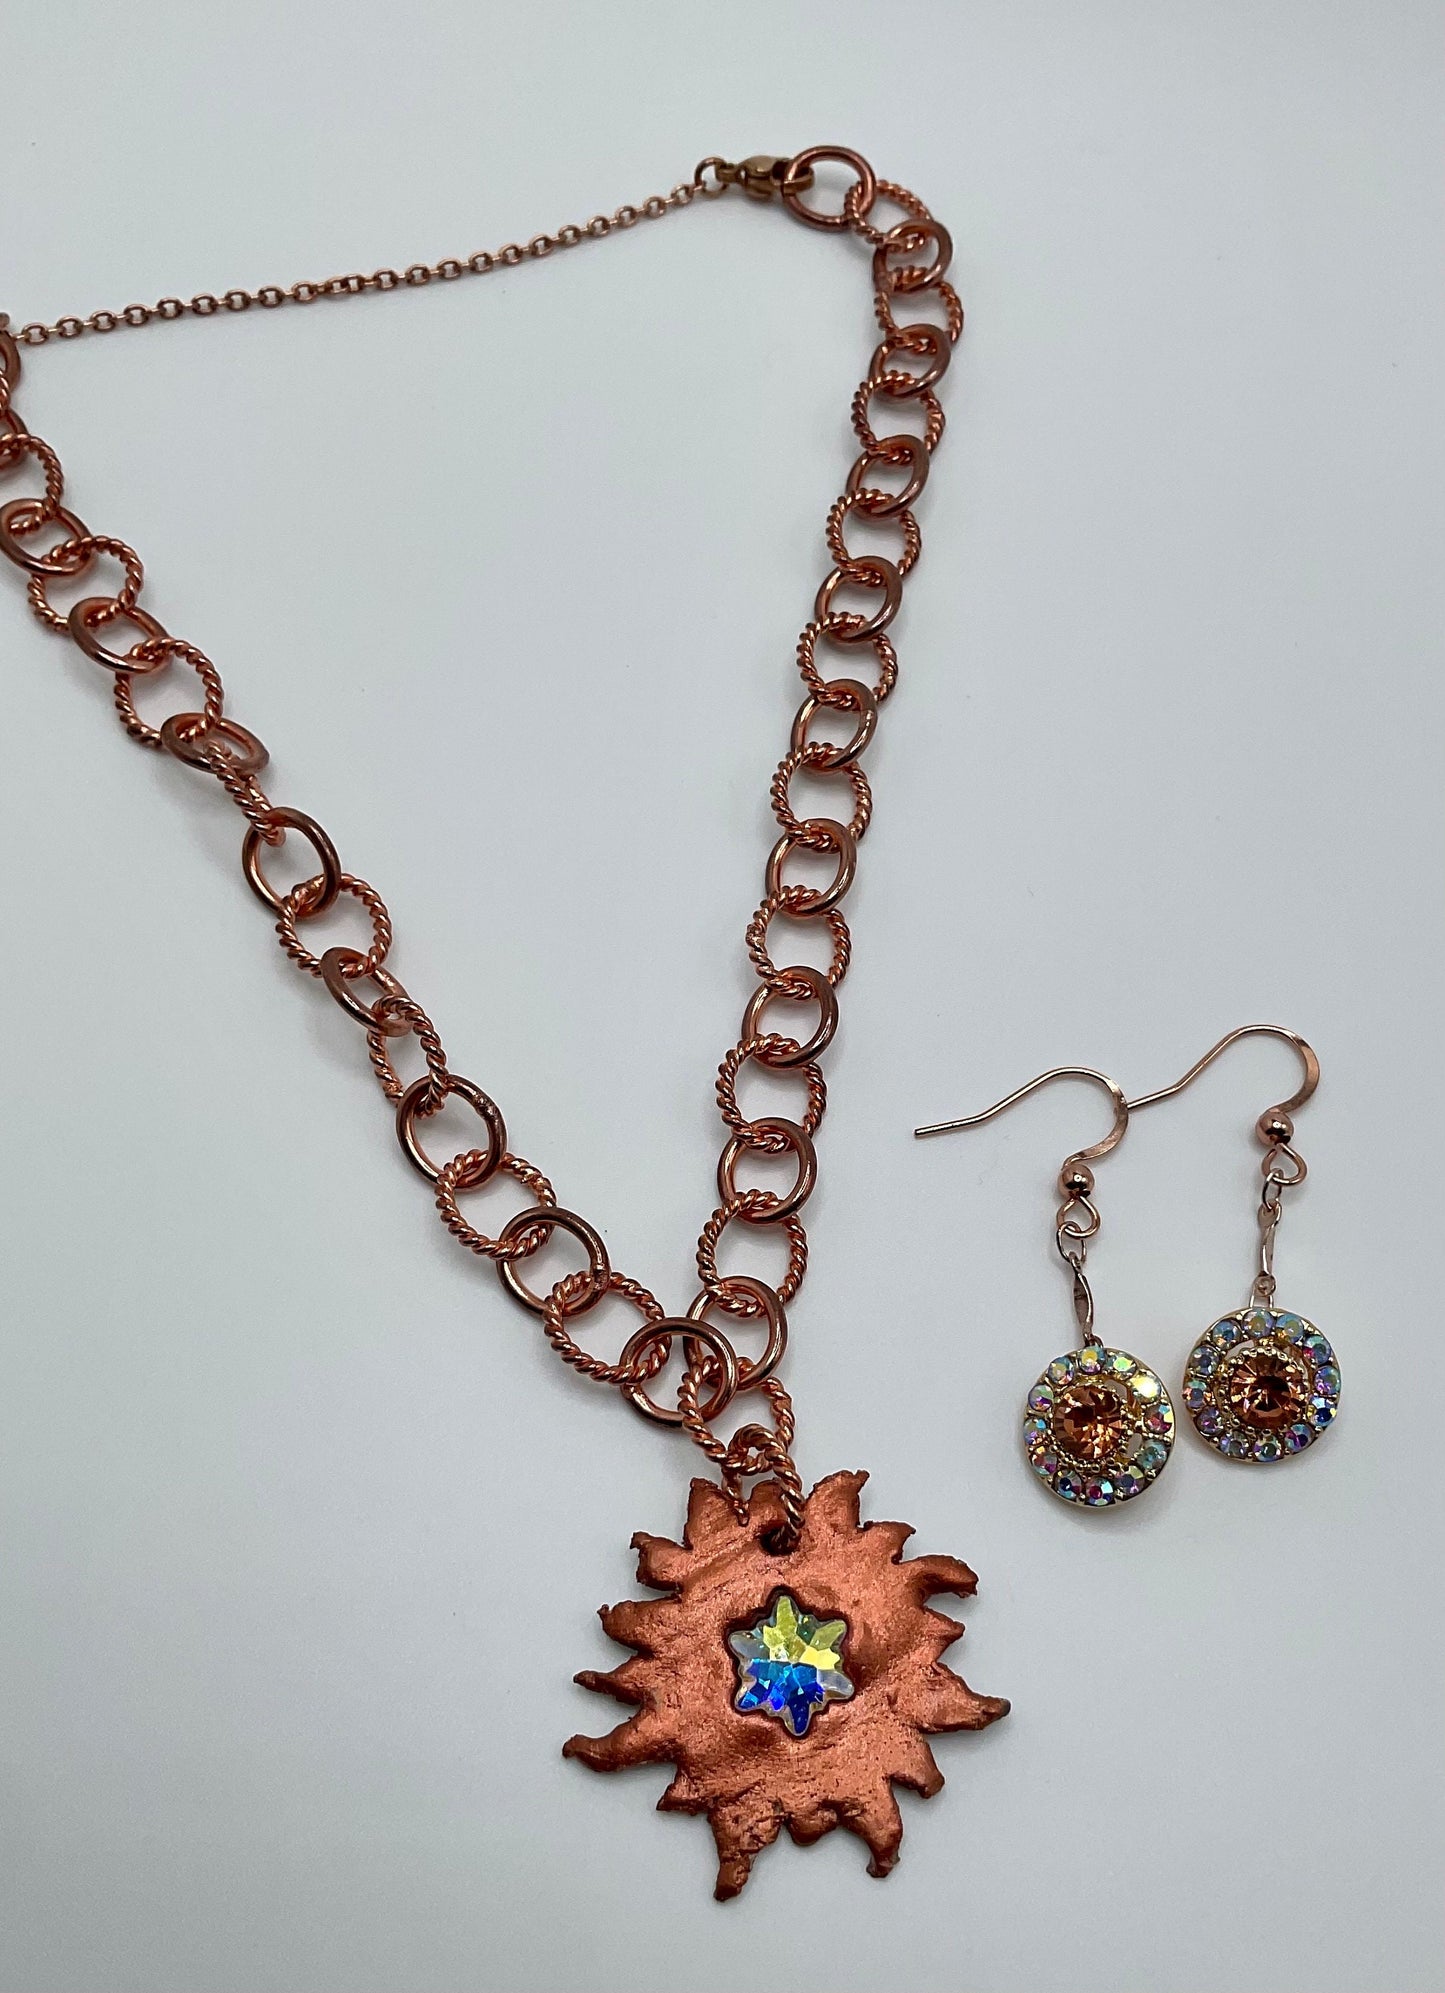 Handmade Star Necklace and Earring Set Bronze Colored With Copper Necklace